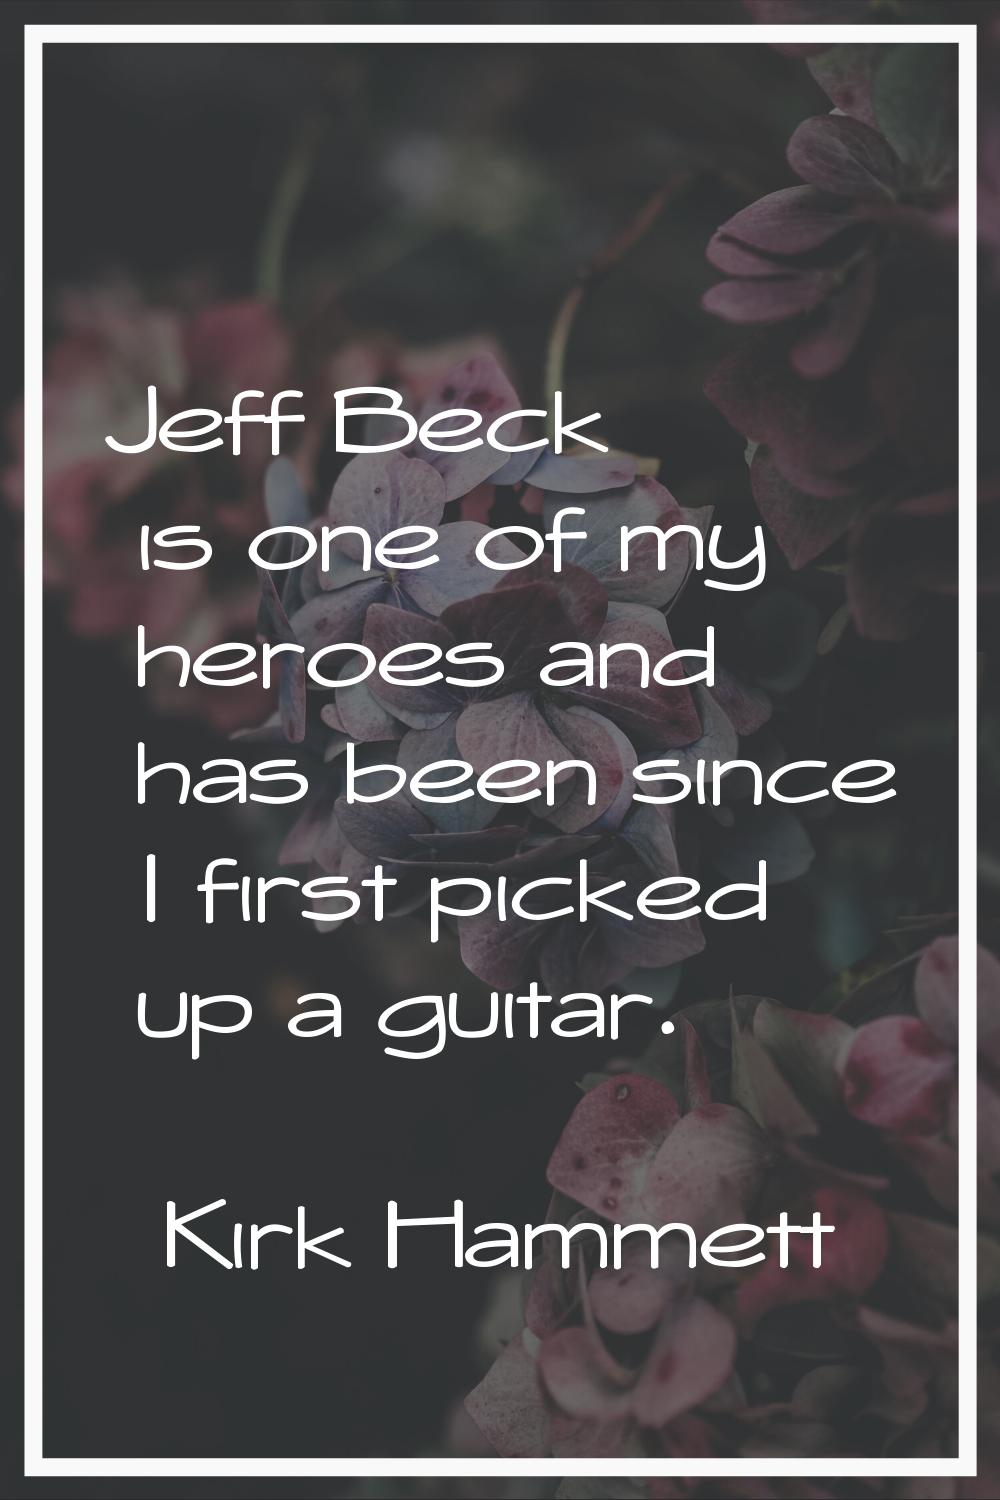 Jeff Beck is one of my heroes and has been since I first picked up a guitar.